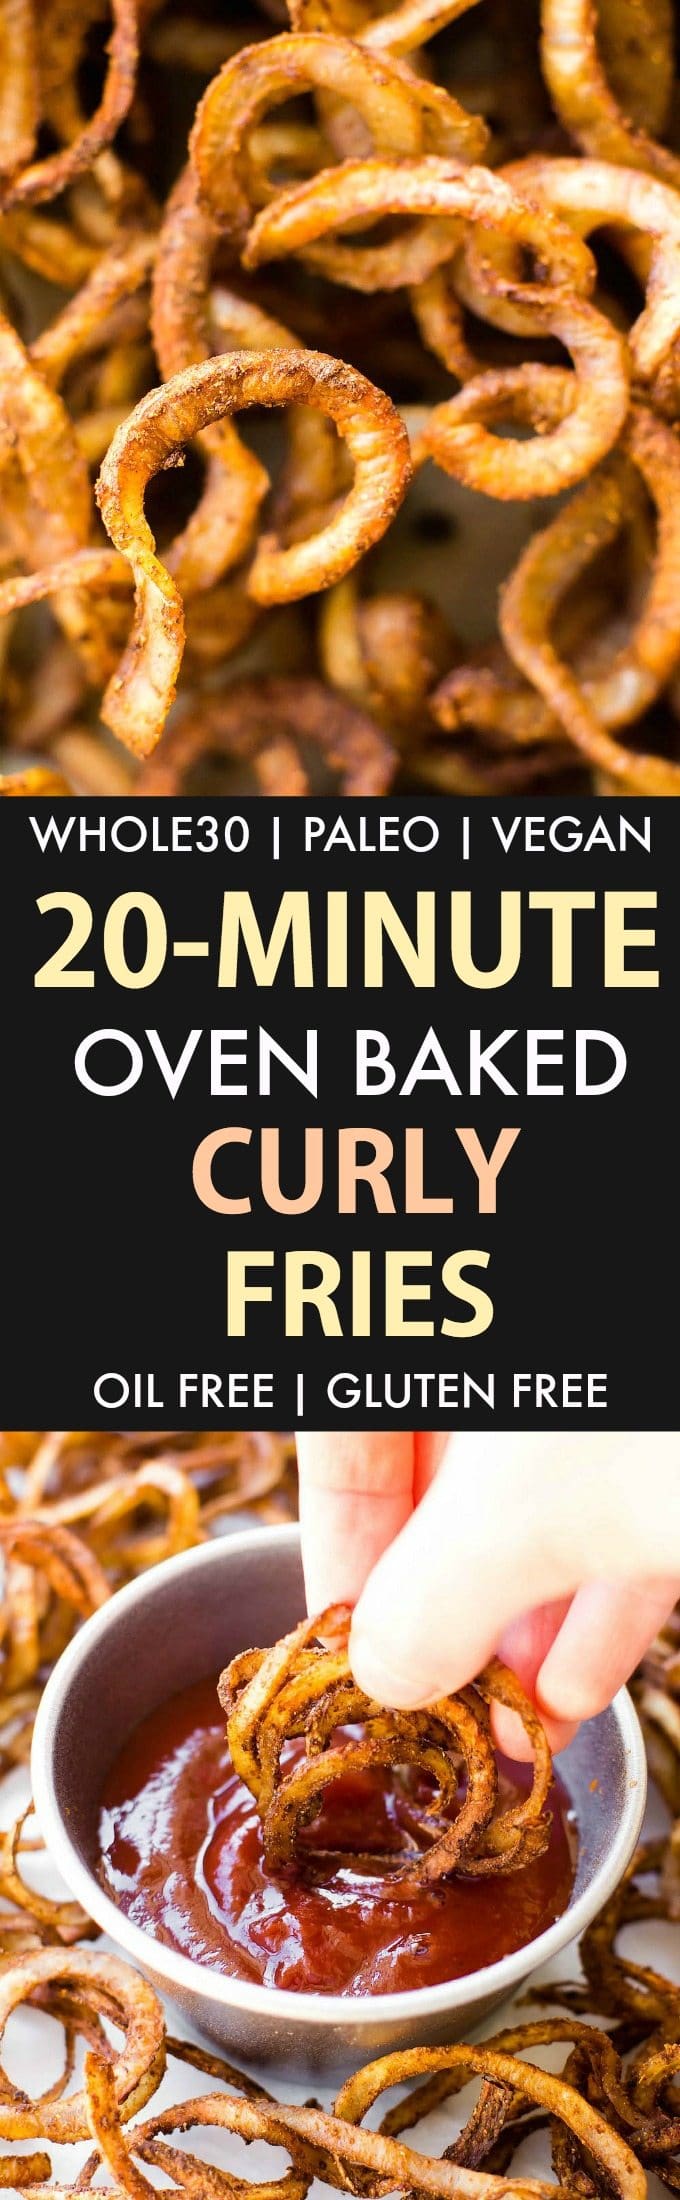 Crispy Oven Baked Curly Fries (Whole30, Paleo, Vegan, Gluten Free)- Easy crispy spiralized oil-free baked potatoes which are the perfect whole30 approved snack or savory side dish! #whole30 #whole30approved #paleorecipe - Recipe on thebigmansworld.com